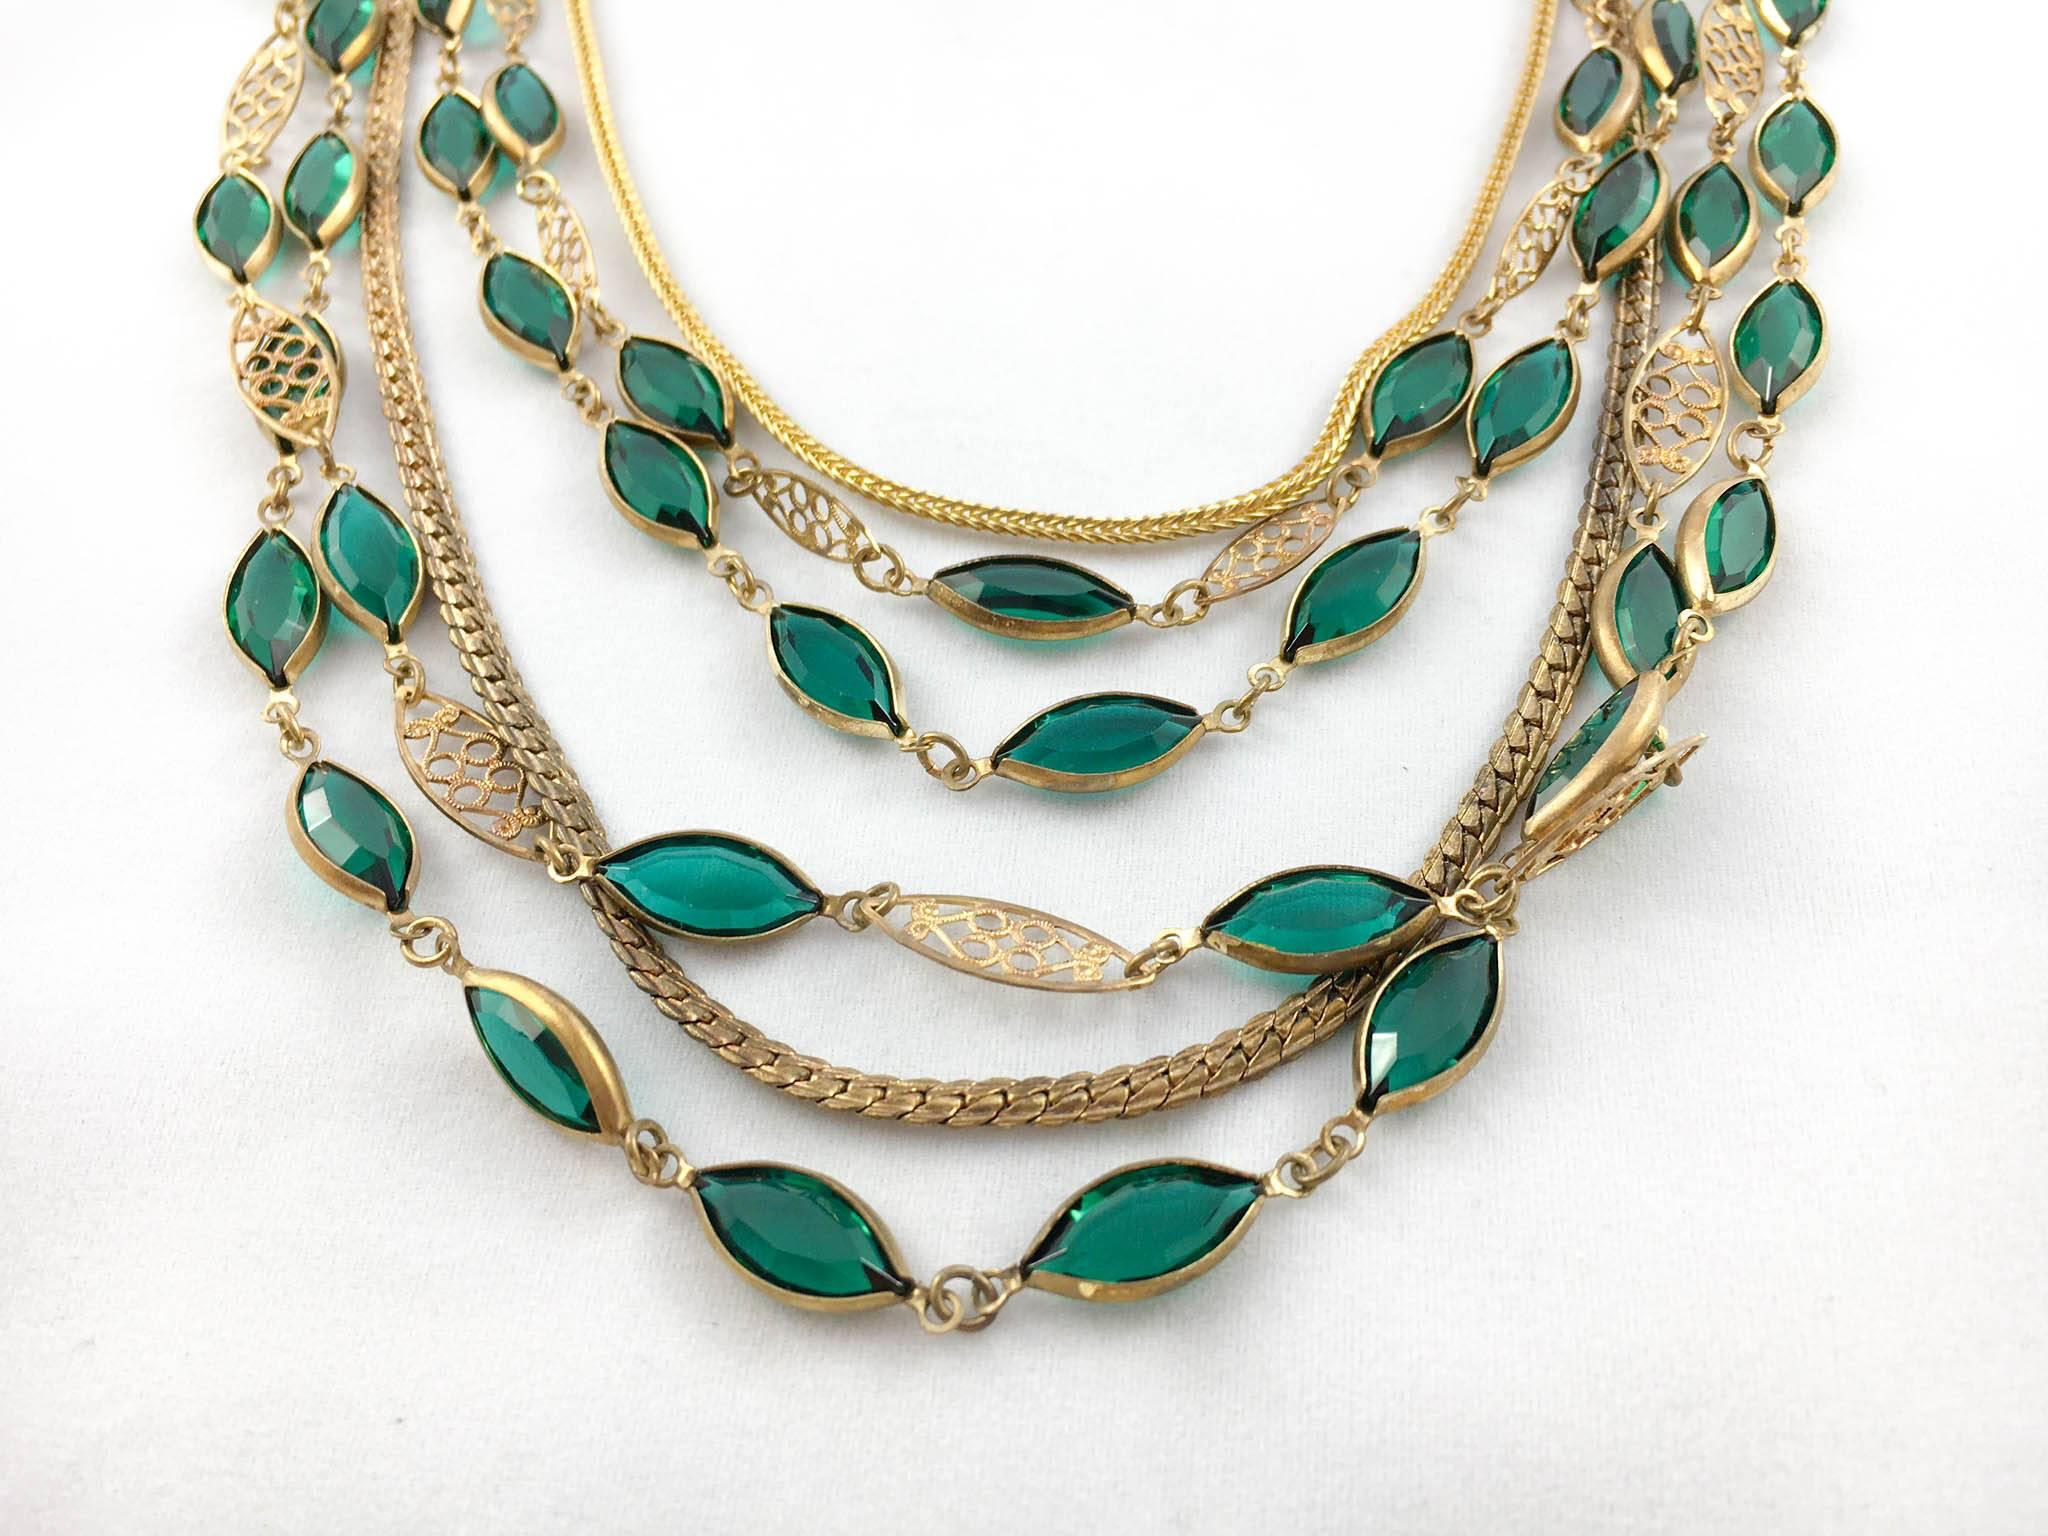 Multi-Strand Gold-Toned and Green Paste Necklace - 1940s/1950s For Sale 1